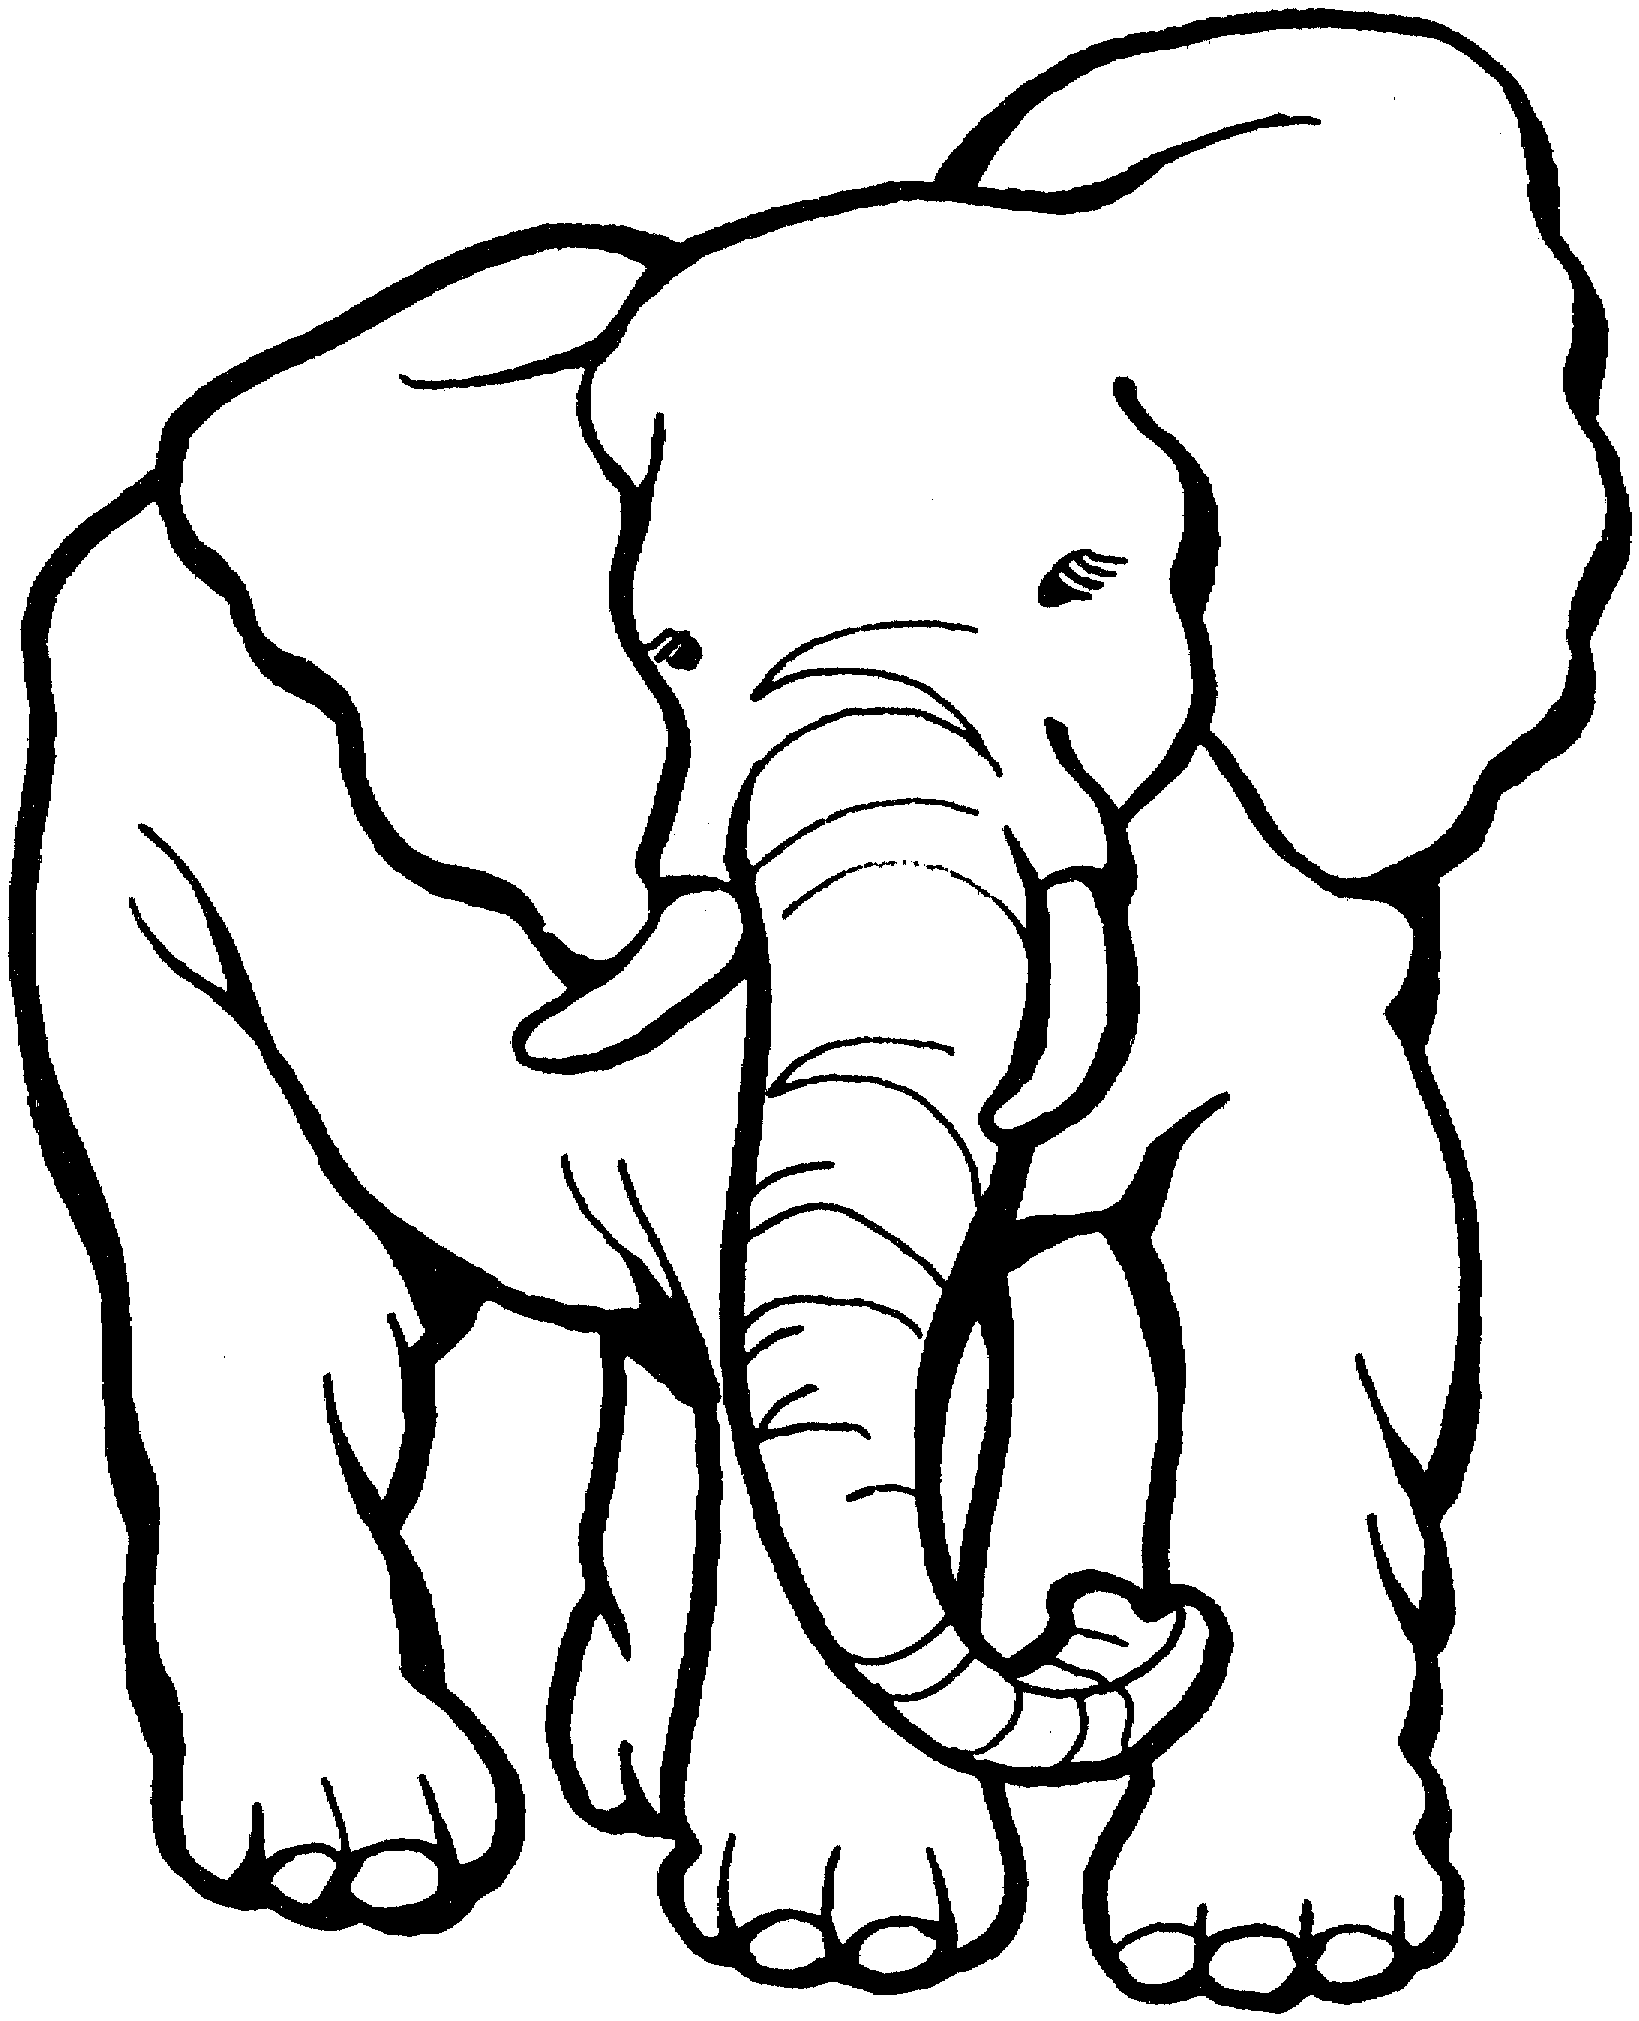 Elephant coloring #11, Download drawings